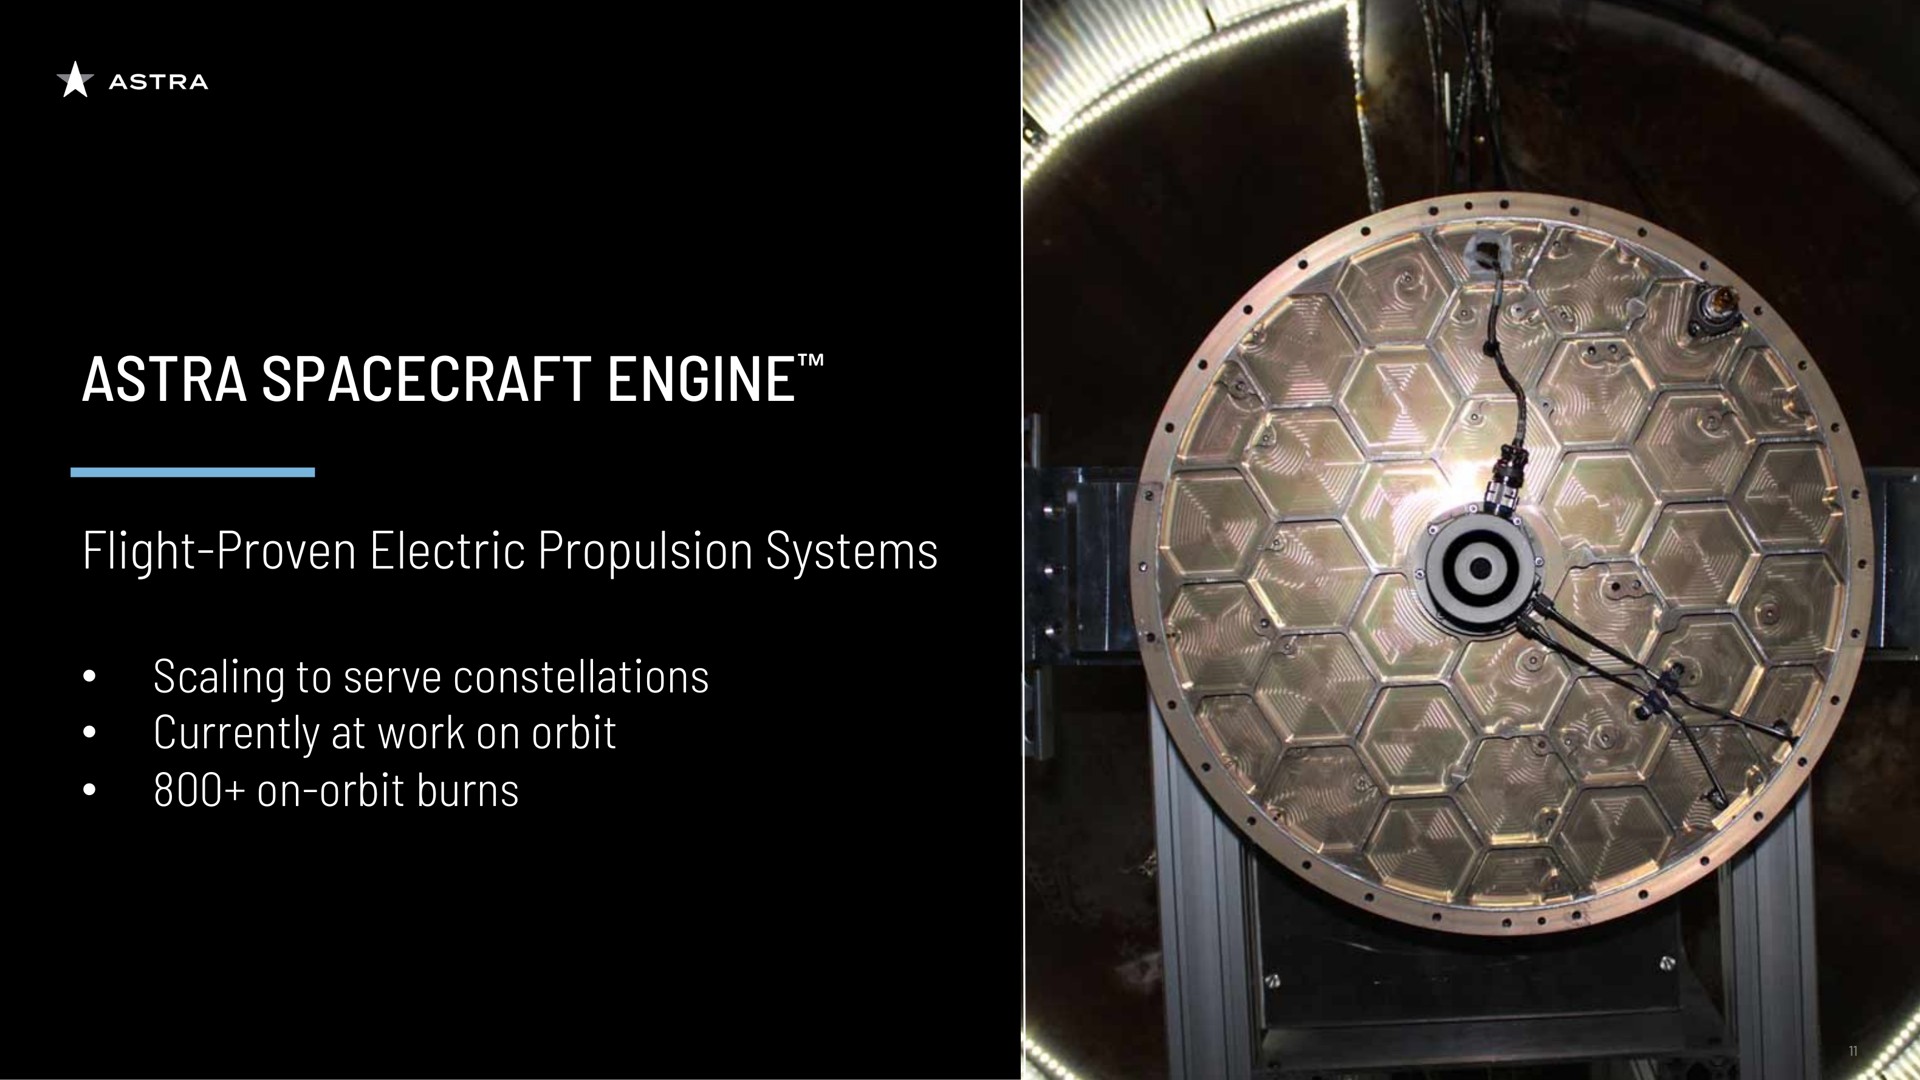 engine flight proven electric propulsion systems scaling to serve constellations currently at work on orbit on orbit burns | Astra